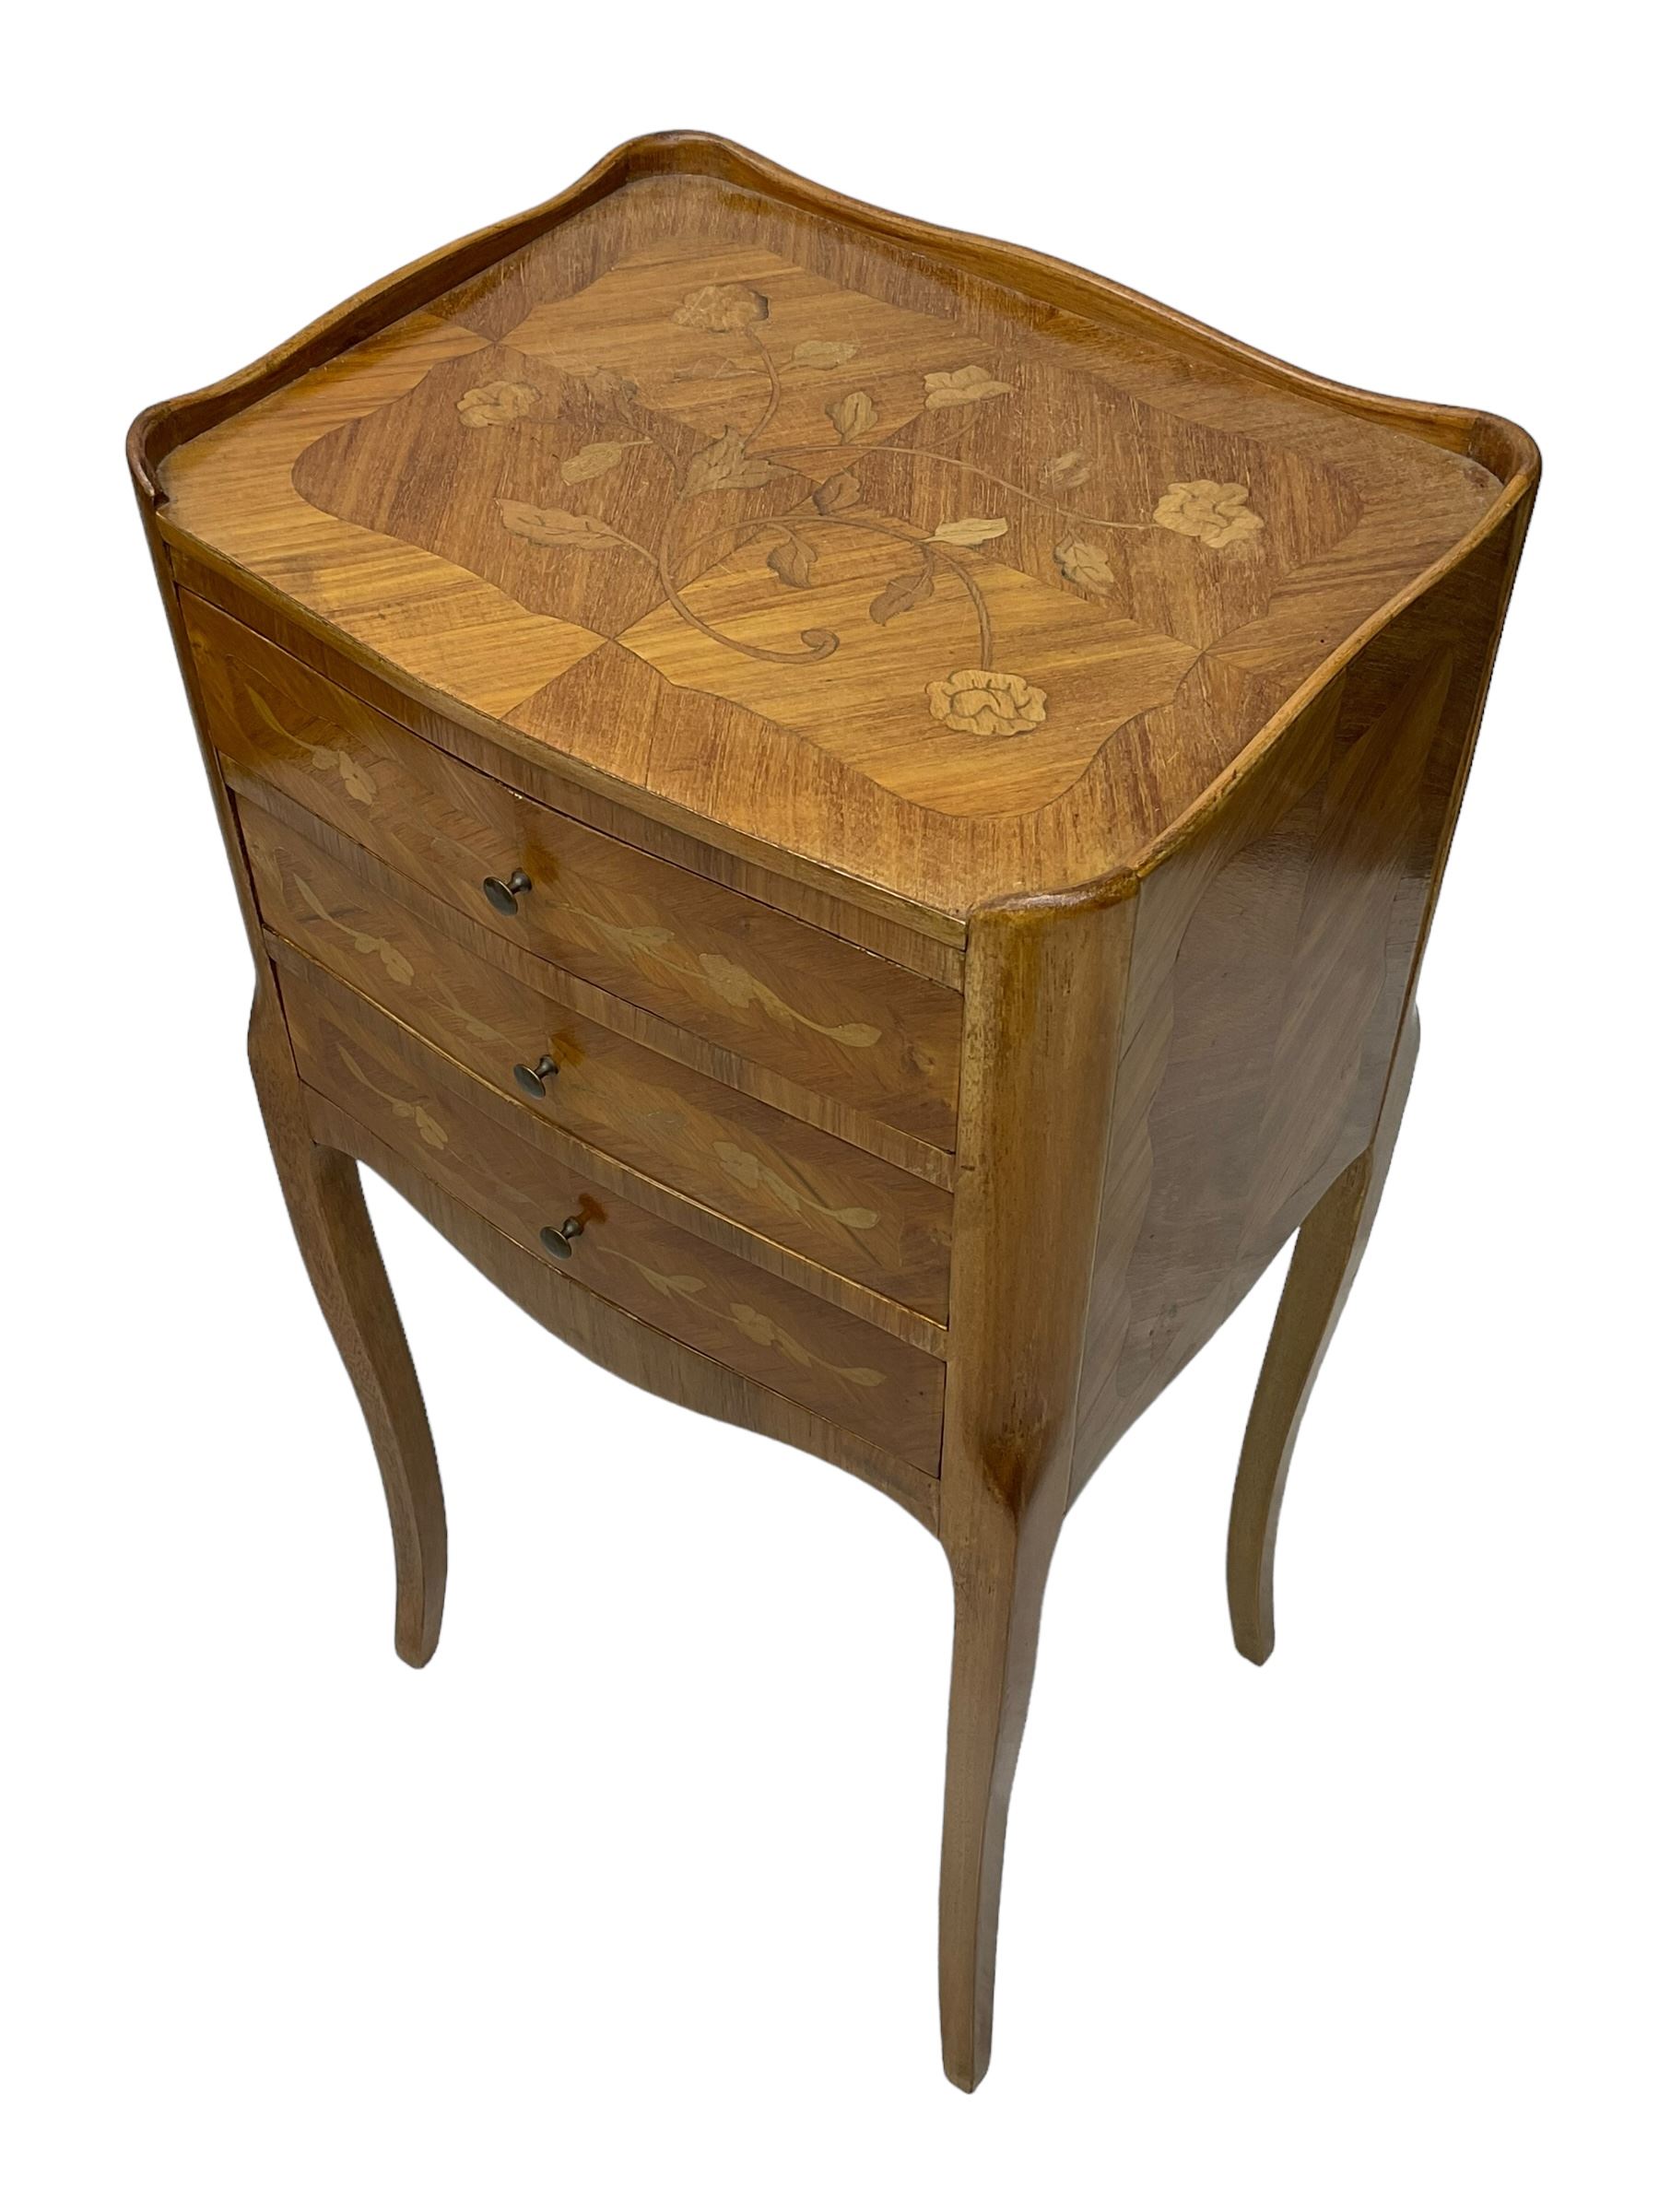 Pair of French inlaid walnut bedside cabinets - Image 2 of 5